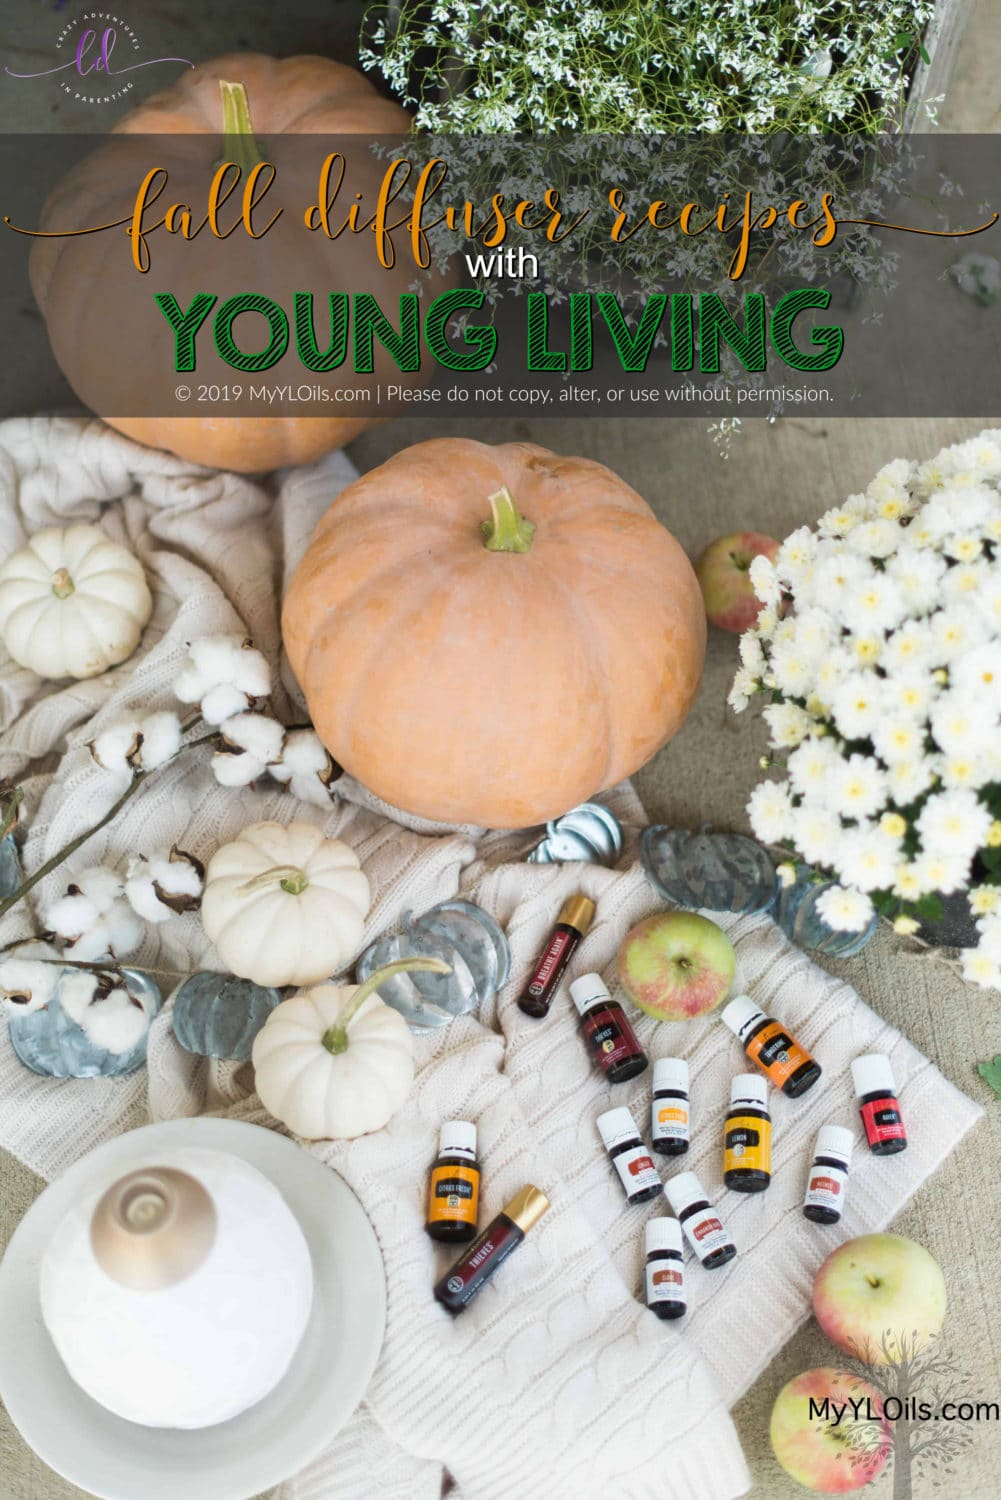 Fall Diffuser Recipes with Young Living